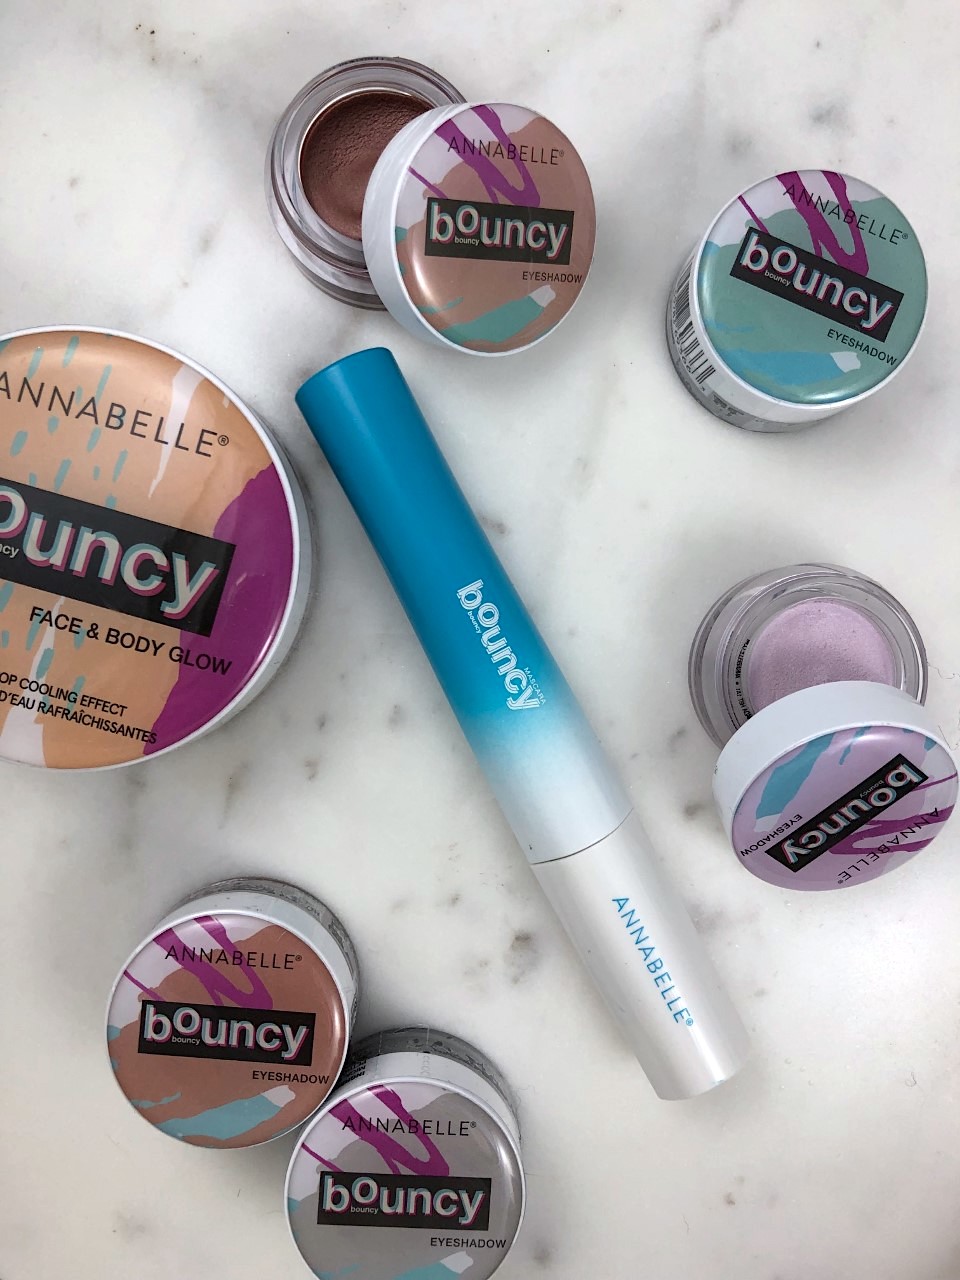 Annabelle Bouncy Bouncy Makeup Collection: A quick review